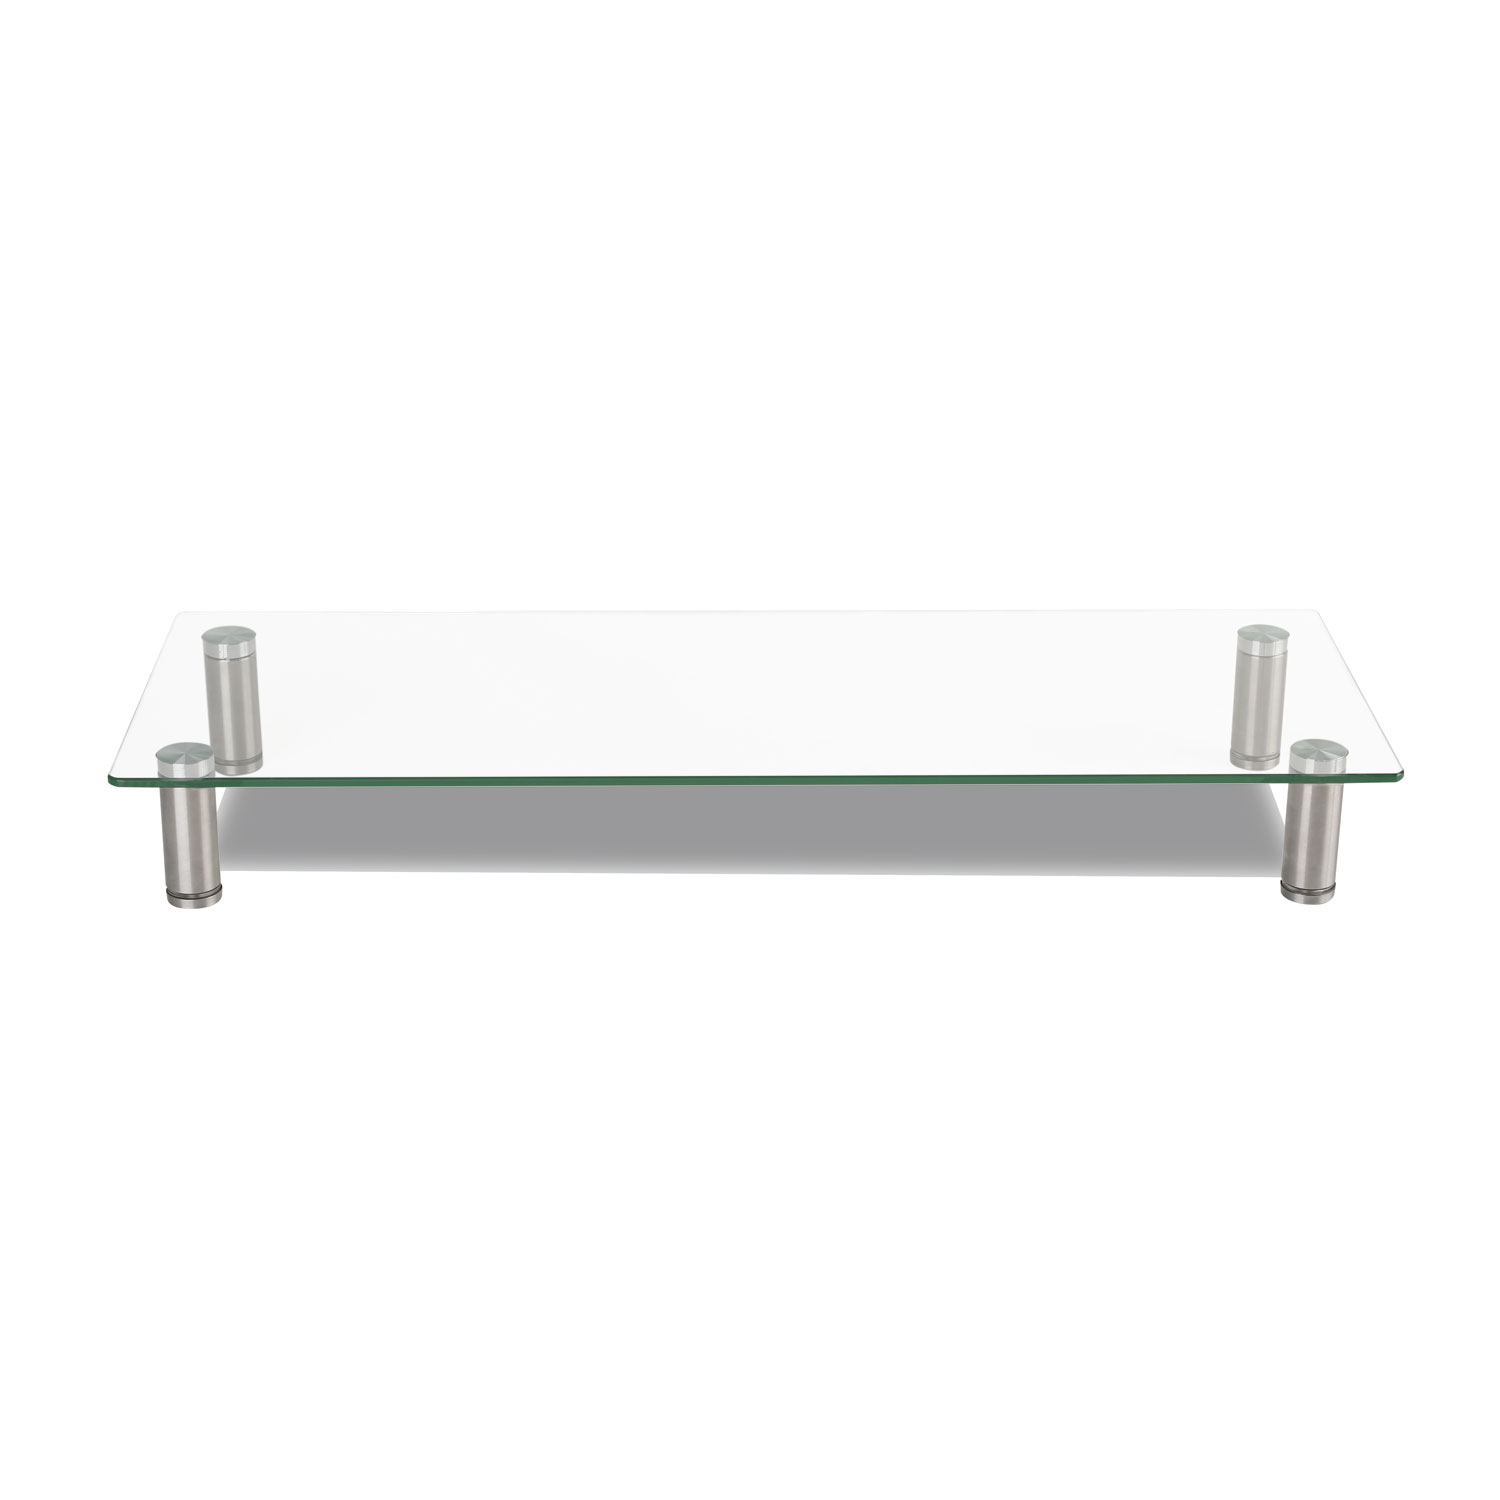 Adjustable Tempered Glass Monitor Riser, 22 3/4 x 8 1/4 x 3 1/2, Clear/Silver